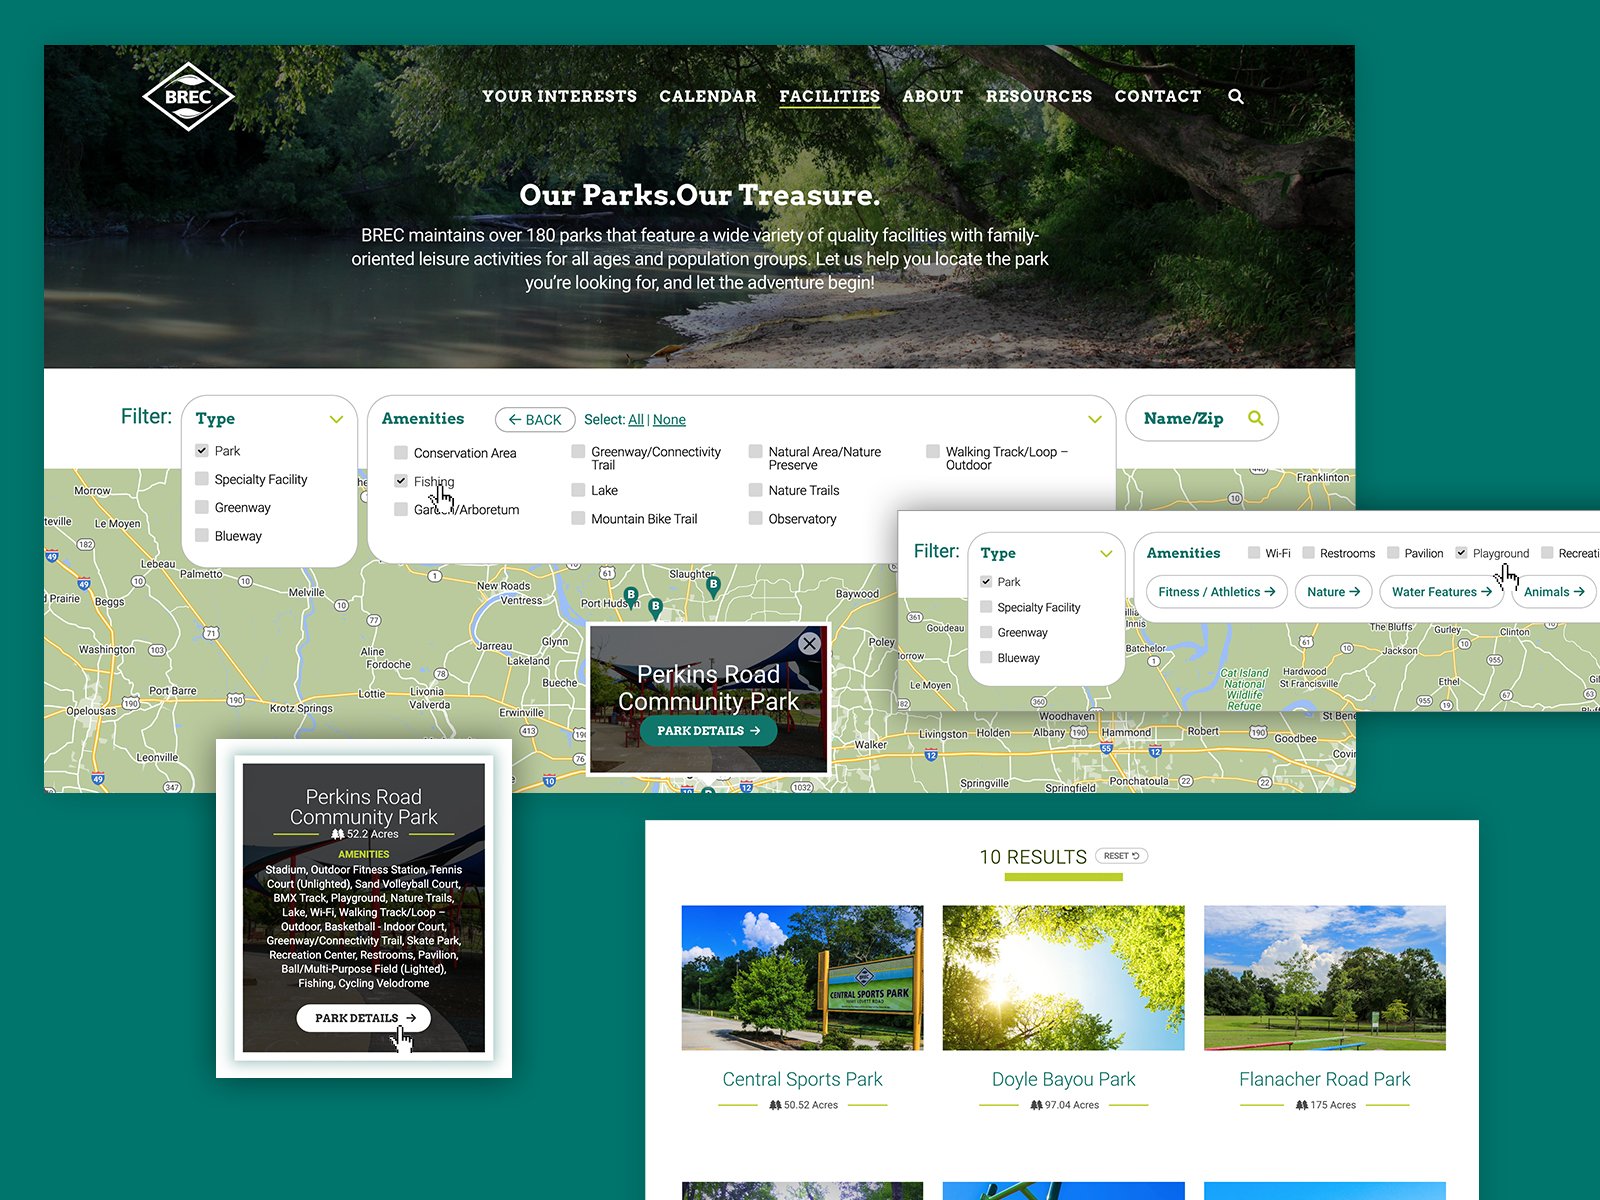 Interactive Park Facilities and Features Map